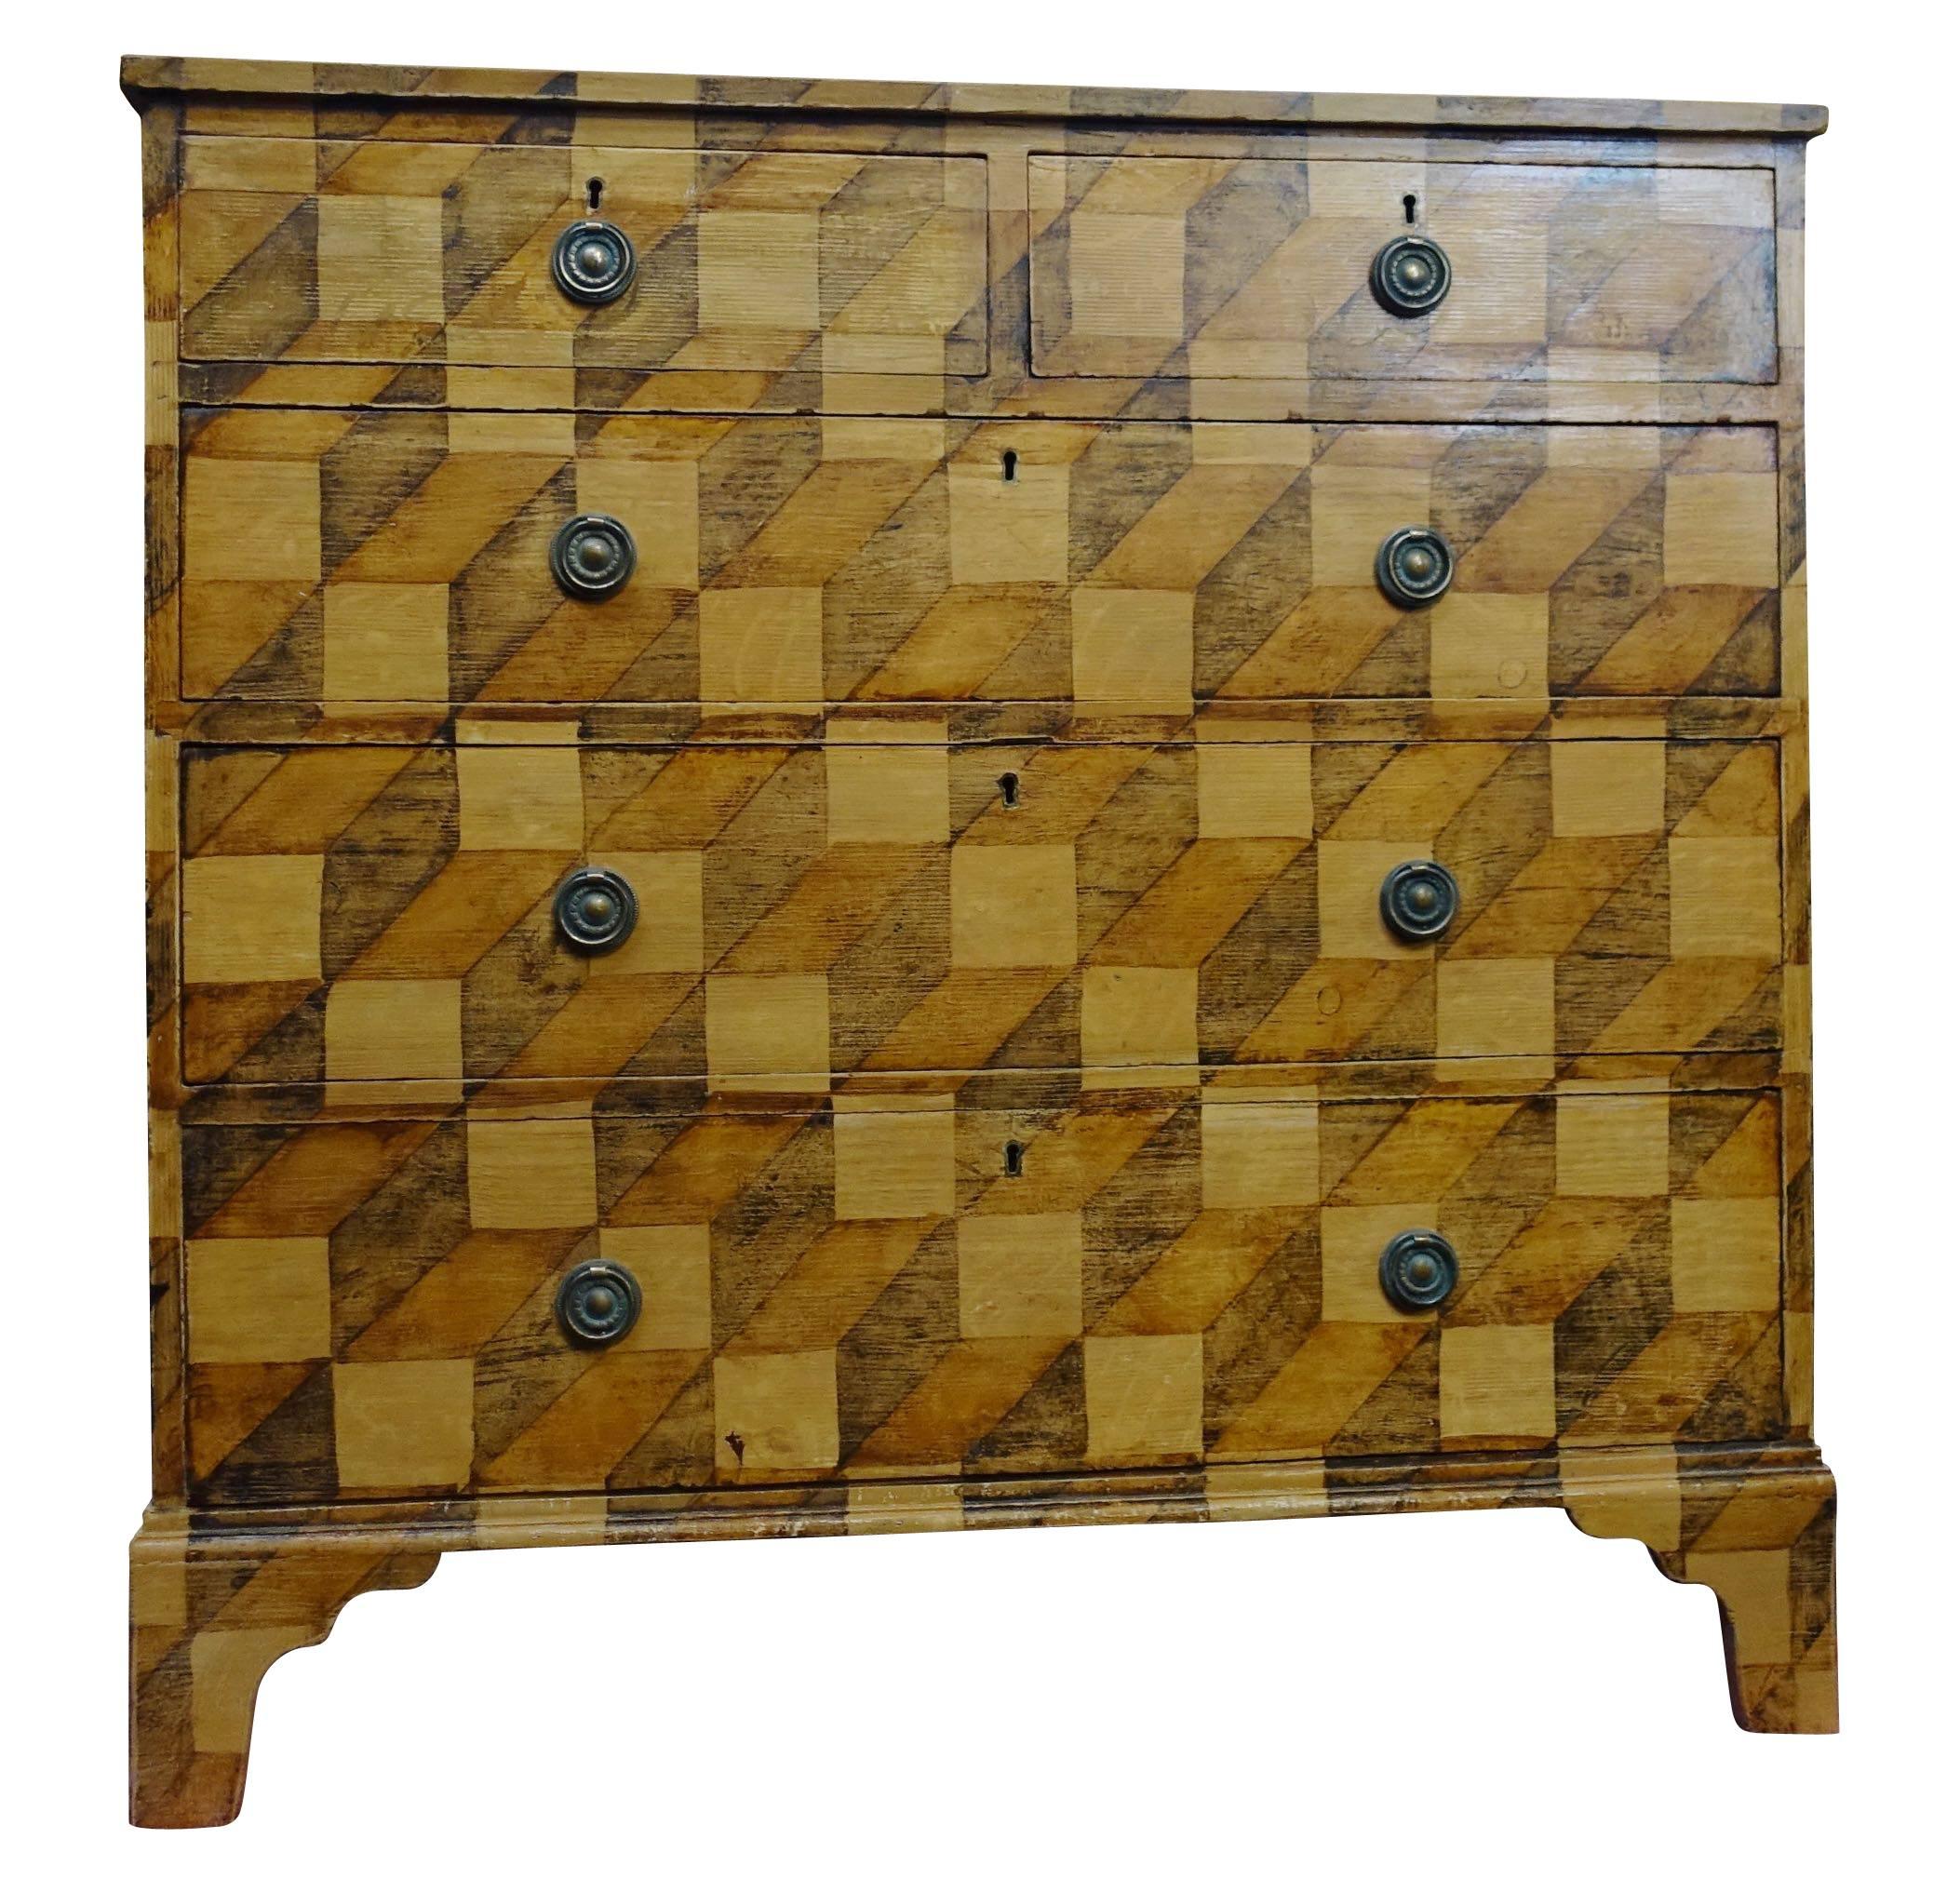 19th century faux painted by English craftsman on original 19th century mahogany five-drawer bureau.
Three dimensional decorative motif in shades of brown.

    
  